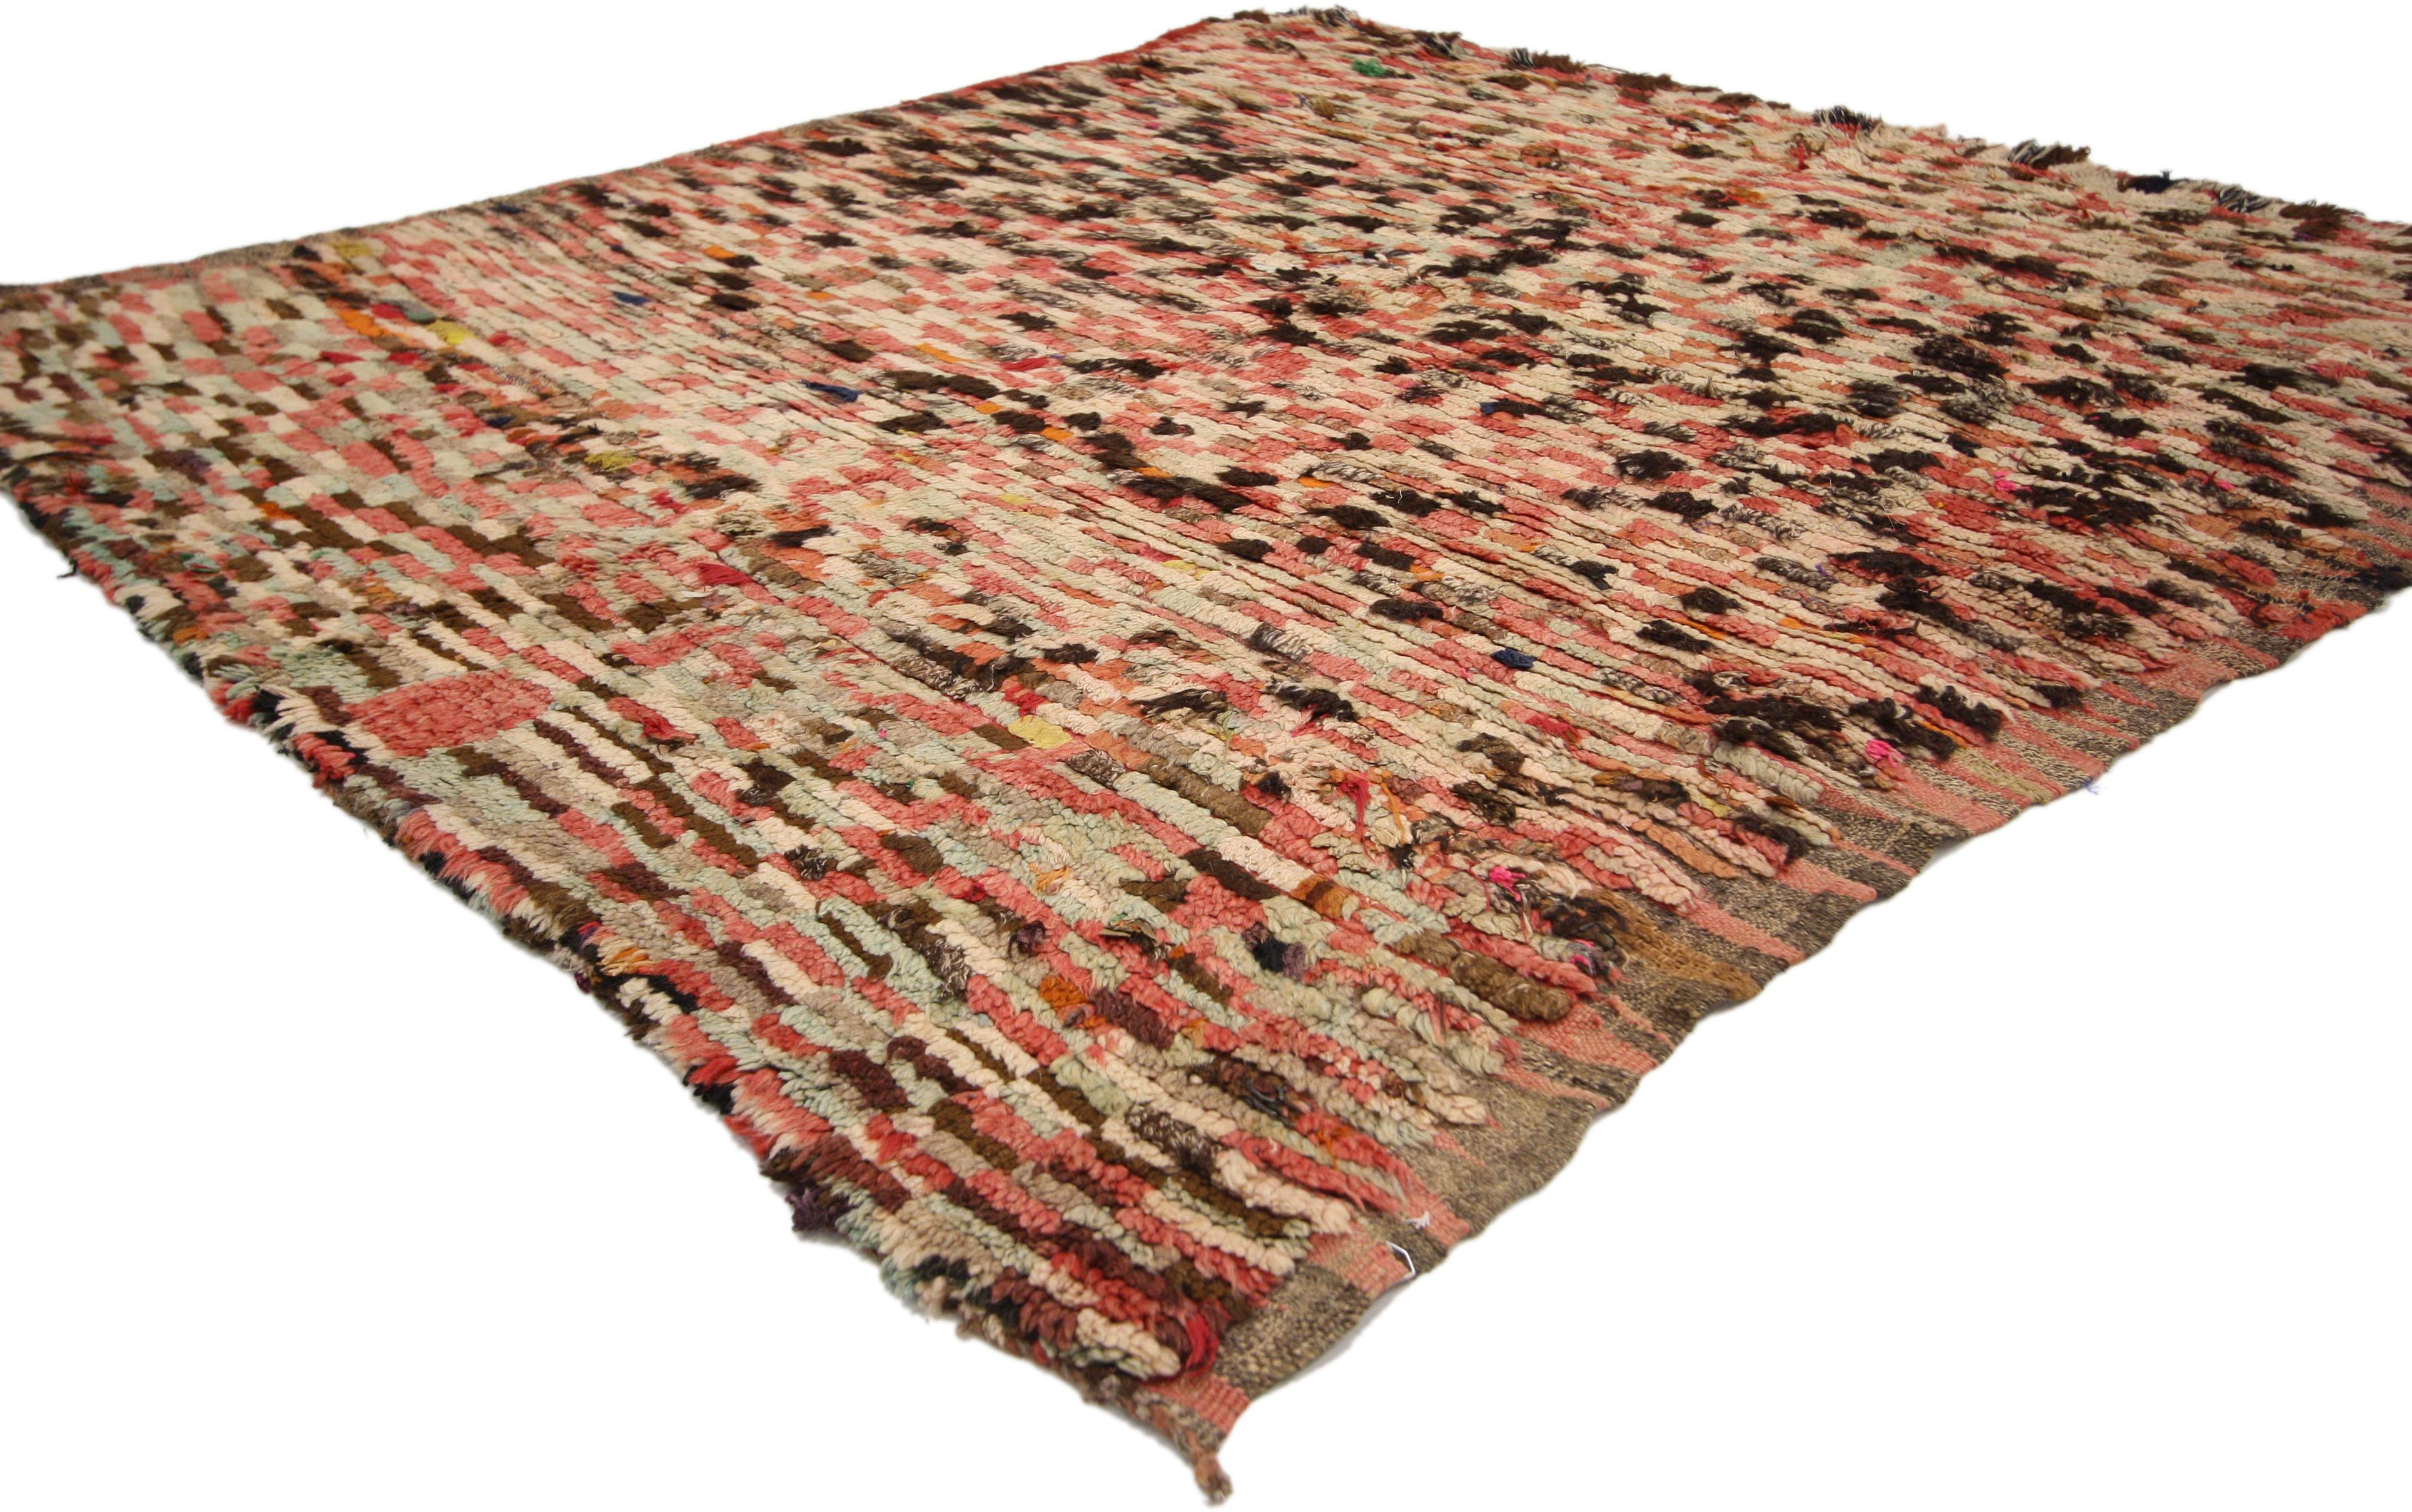 74171 Vintage Boujad Moroccan Rug, 05'07 x 06'00. In the enchanting realm of Morocco's vibrant Boujad region, nestled within the Middle Atlas Mountains, Boujad rugs emerge as meticulously handwoven masterpieces crafted by the Berber tribes, notably